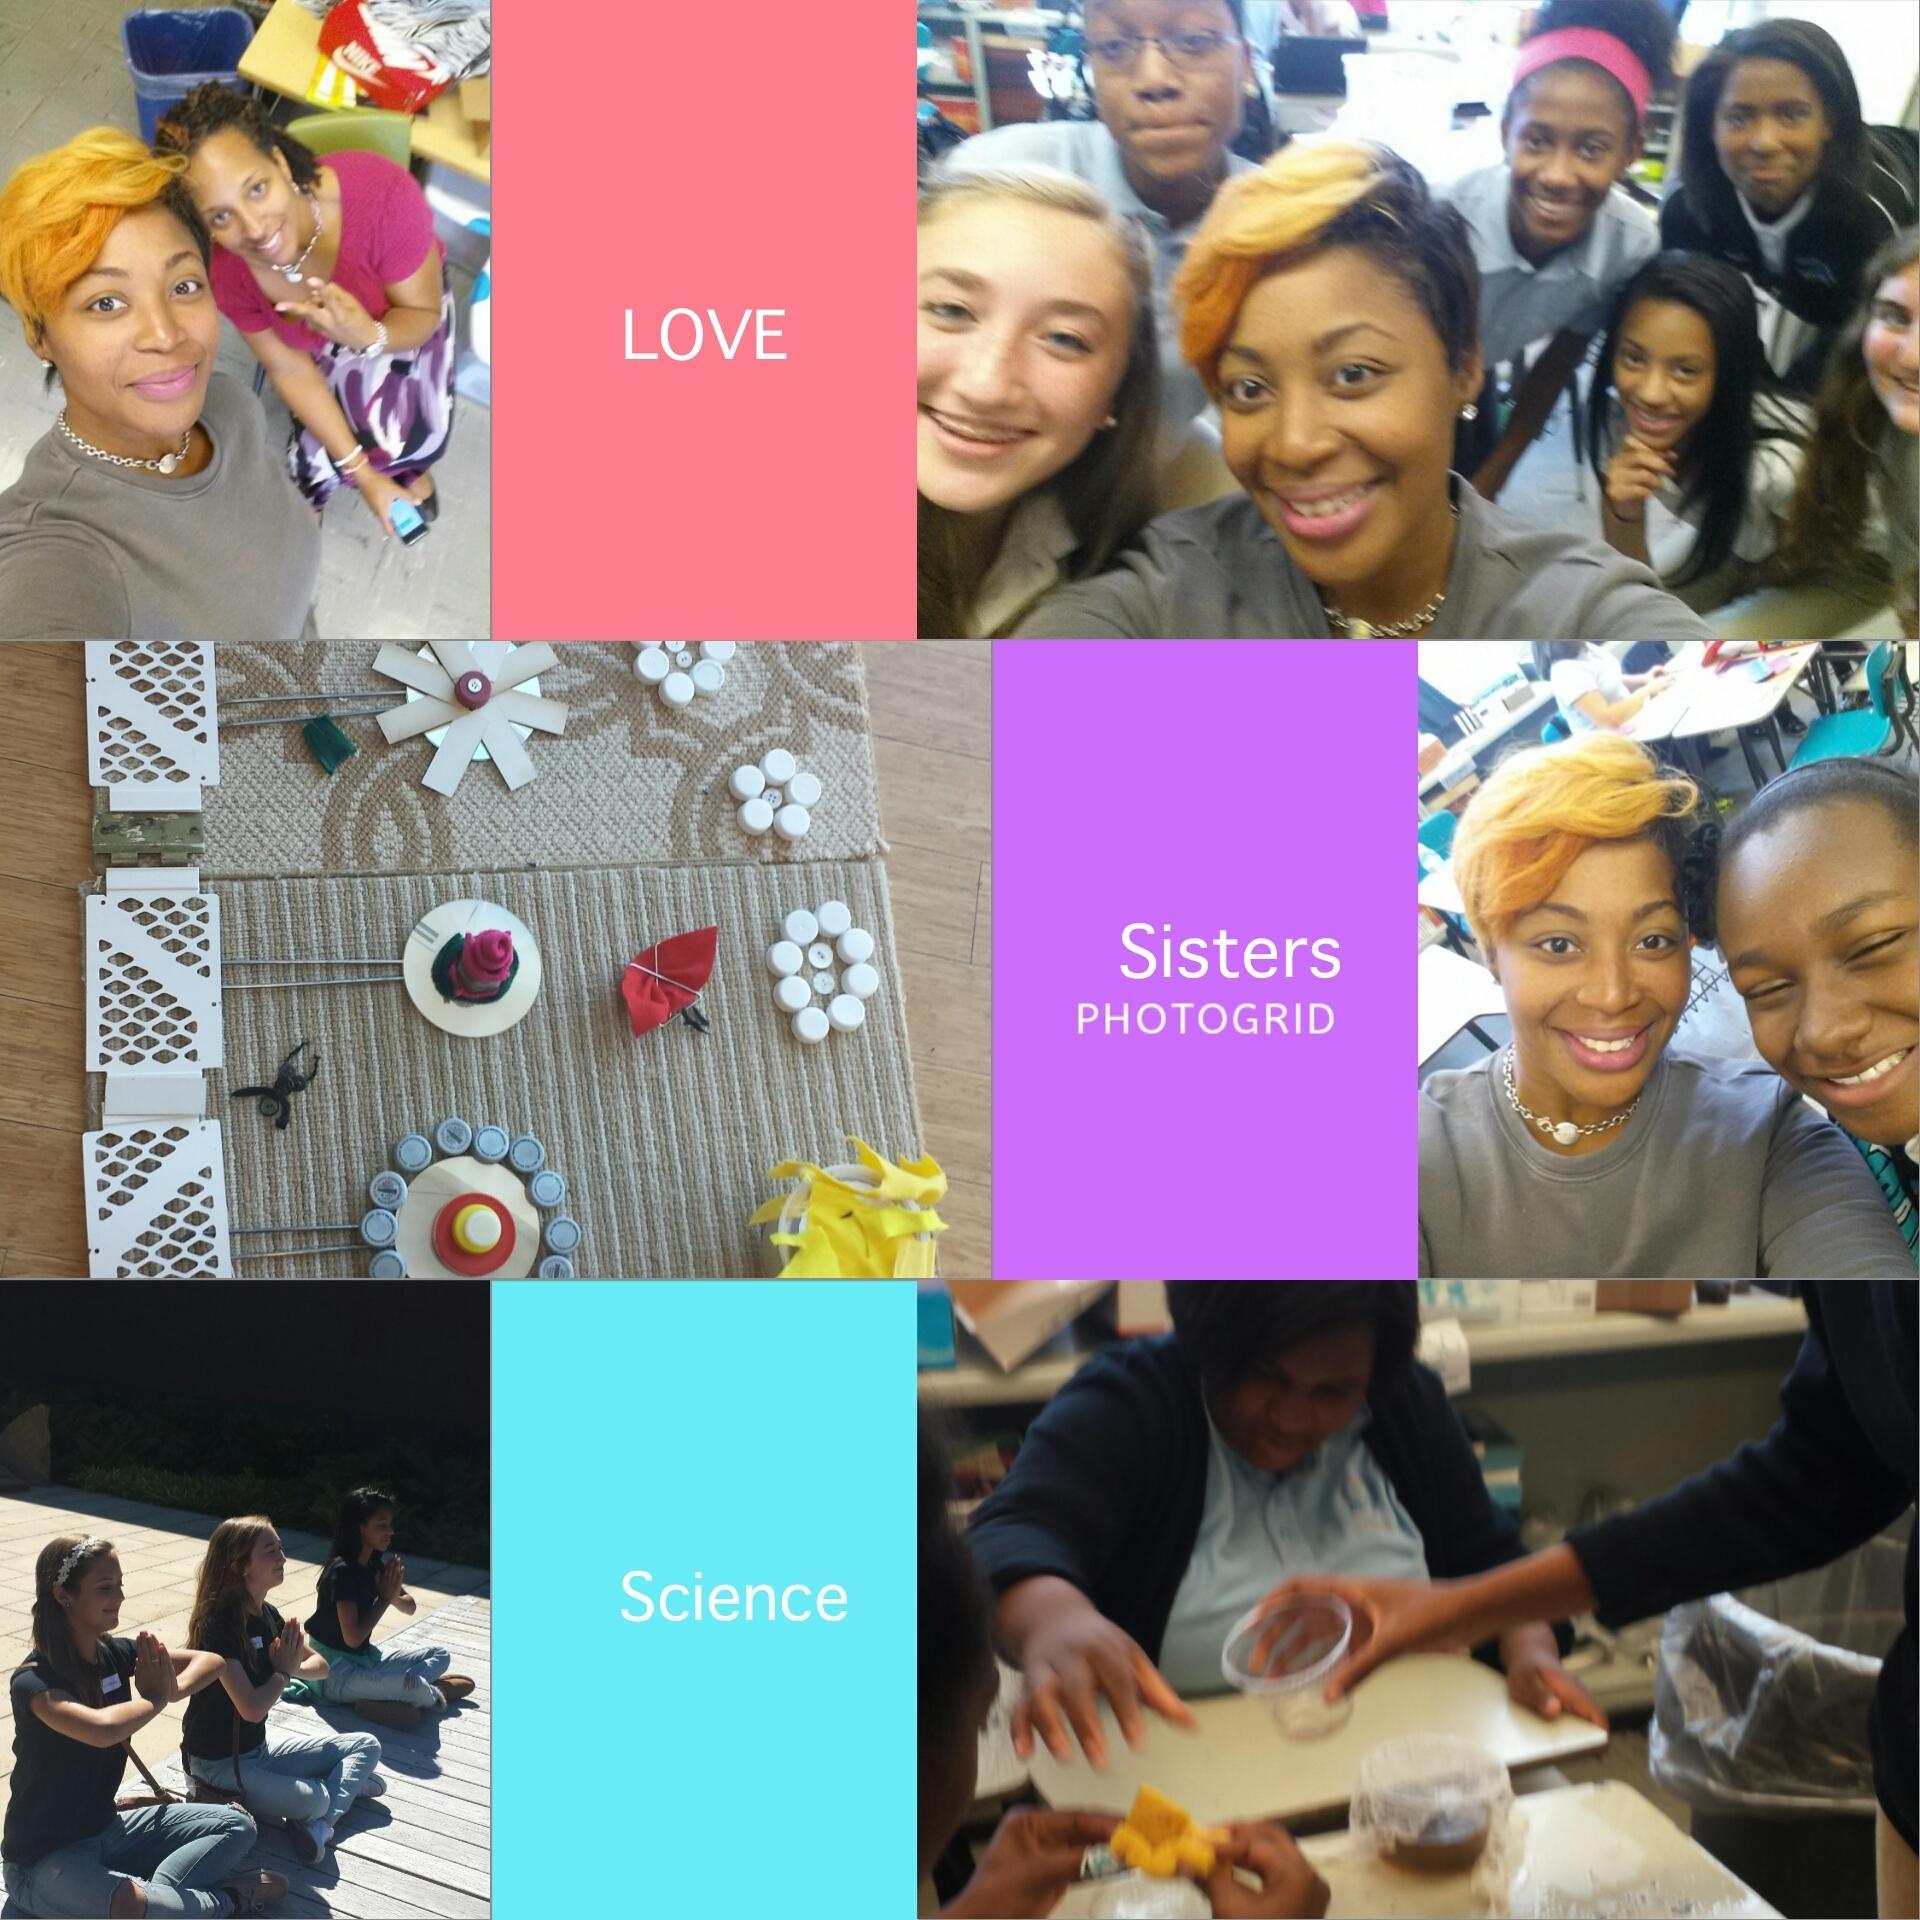 Seeks to empower the African American female or the female student situated in poverty in S.T.E.A.M. education: Inquiry based, hands-on, real-world applications